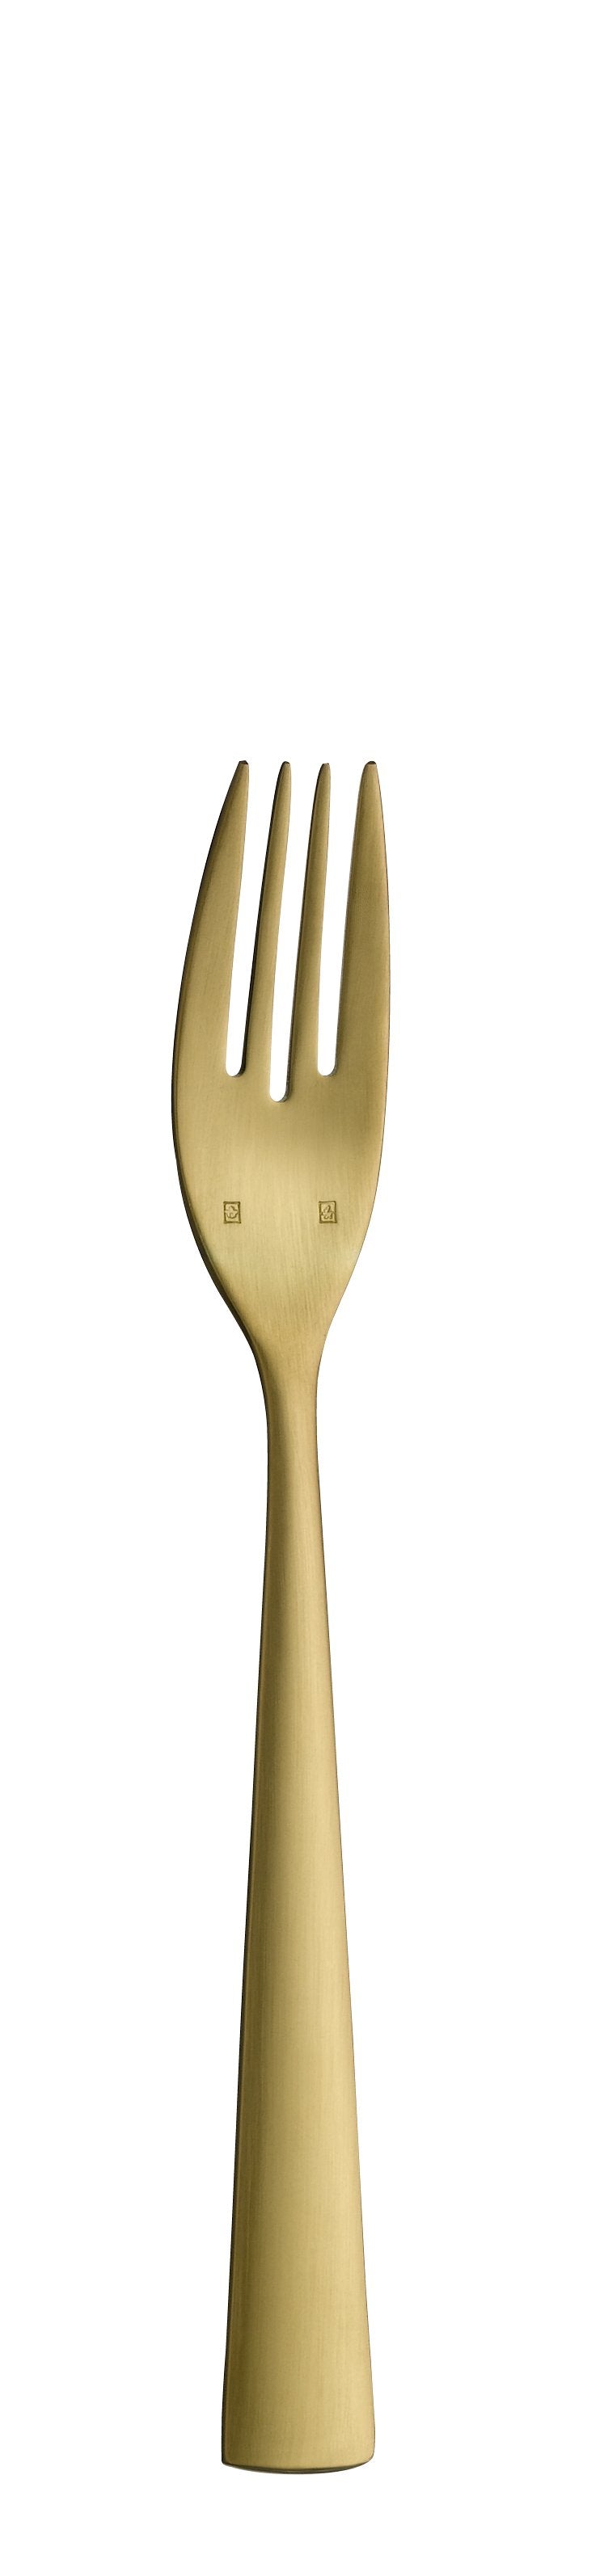 Fish fork ACCENT PVD gold brushed 179mm